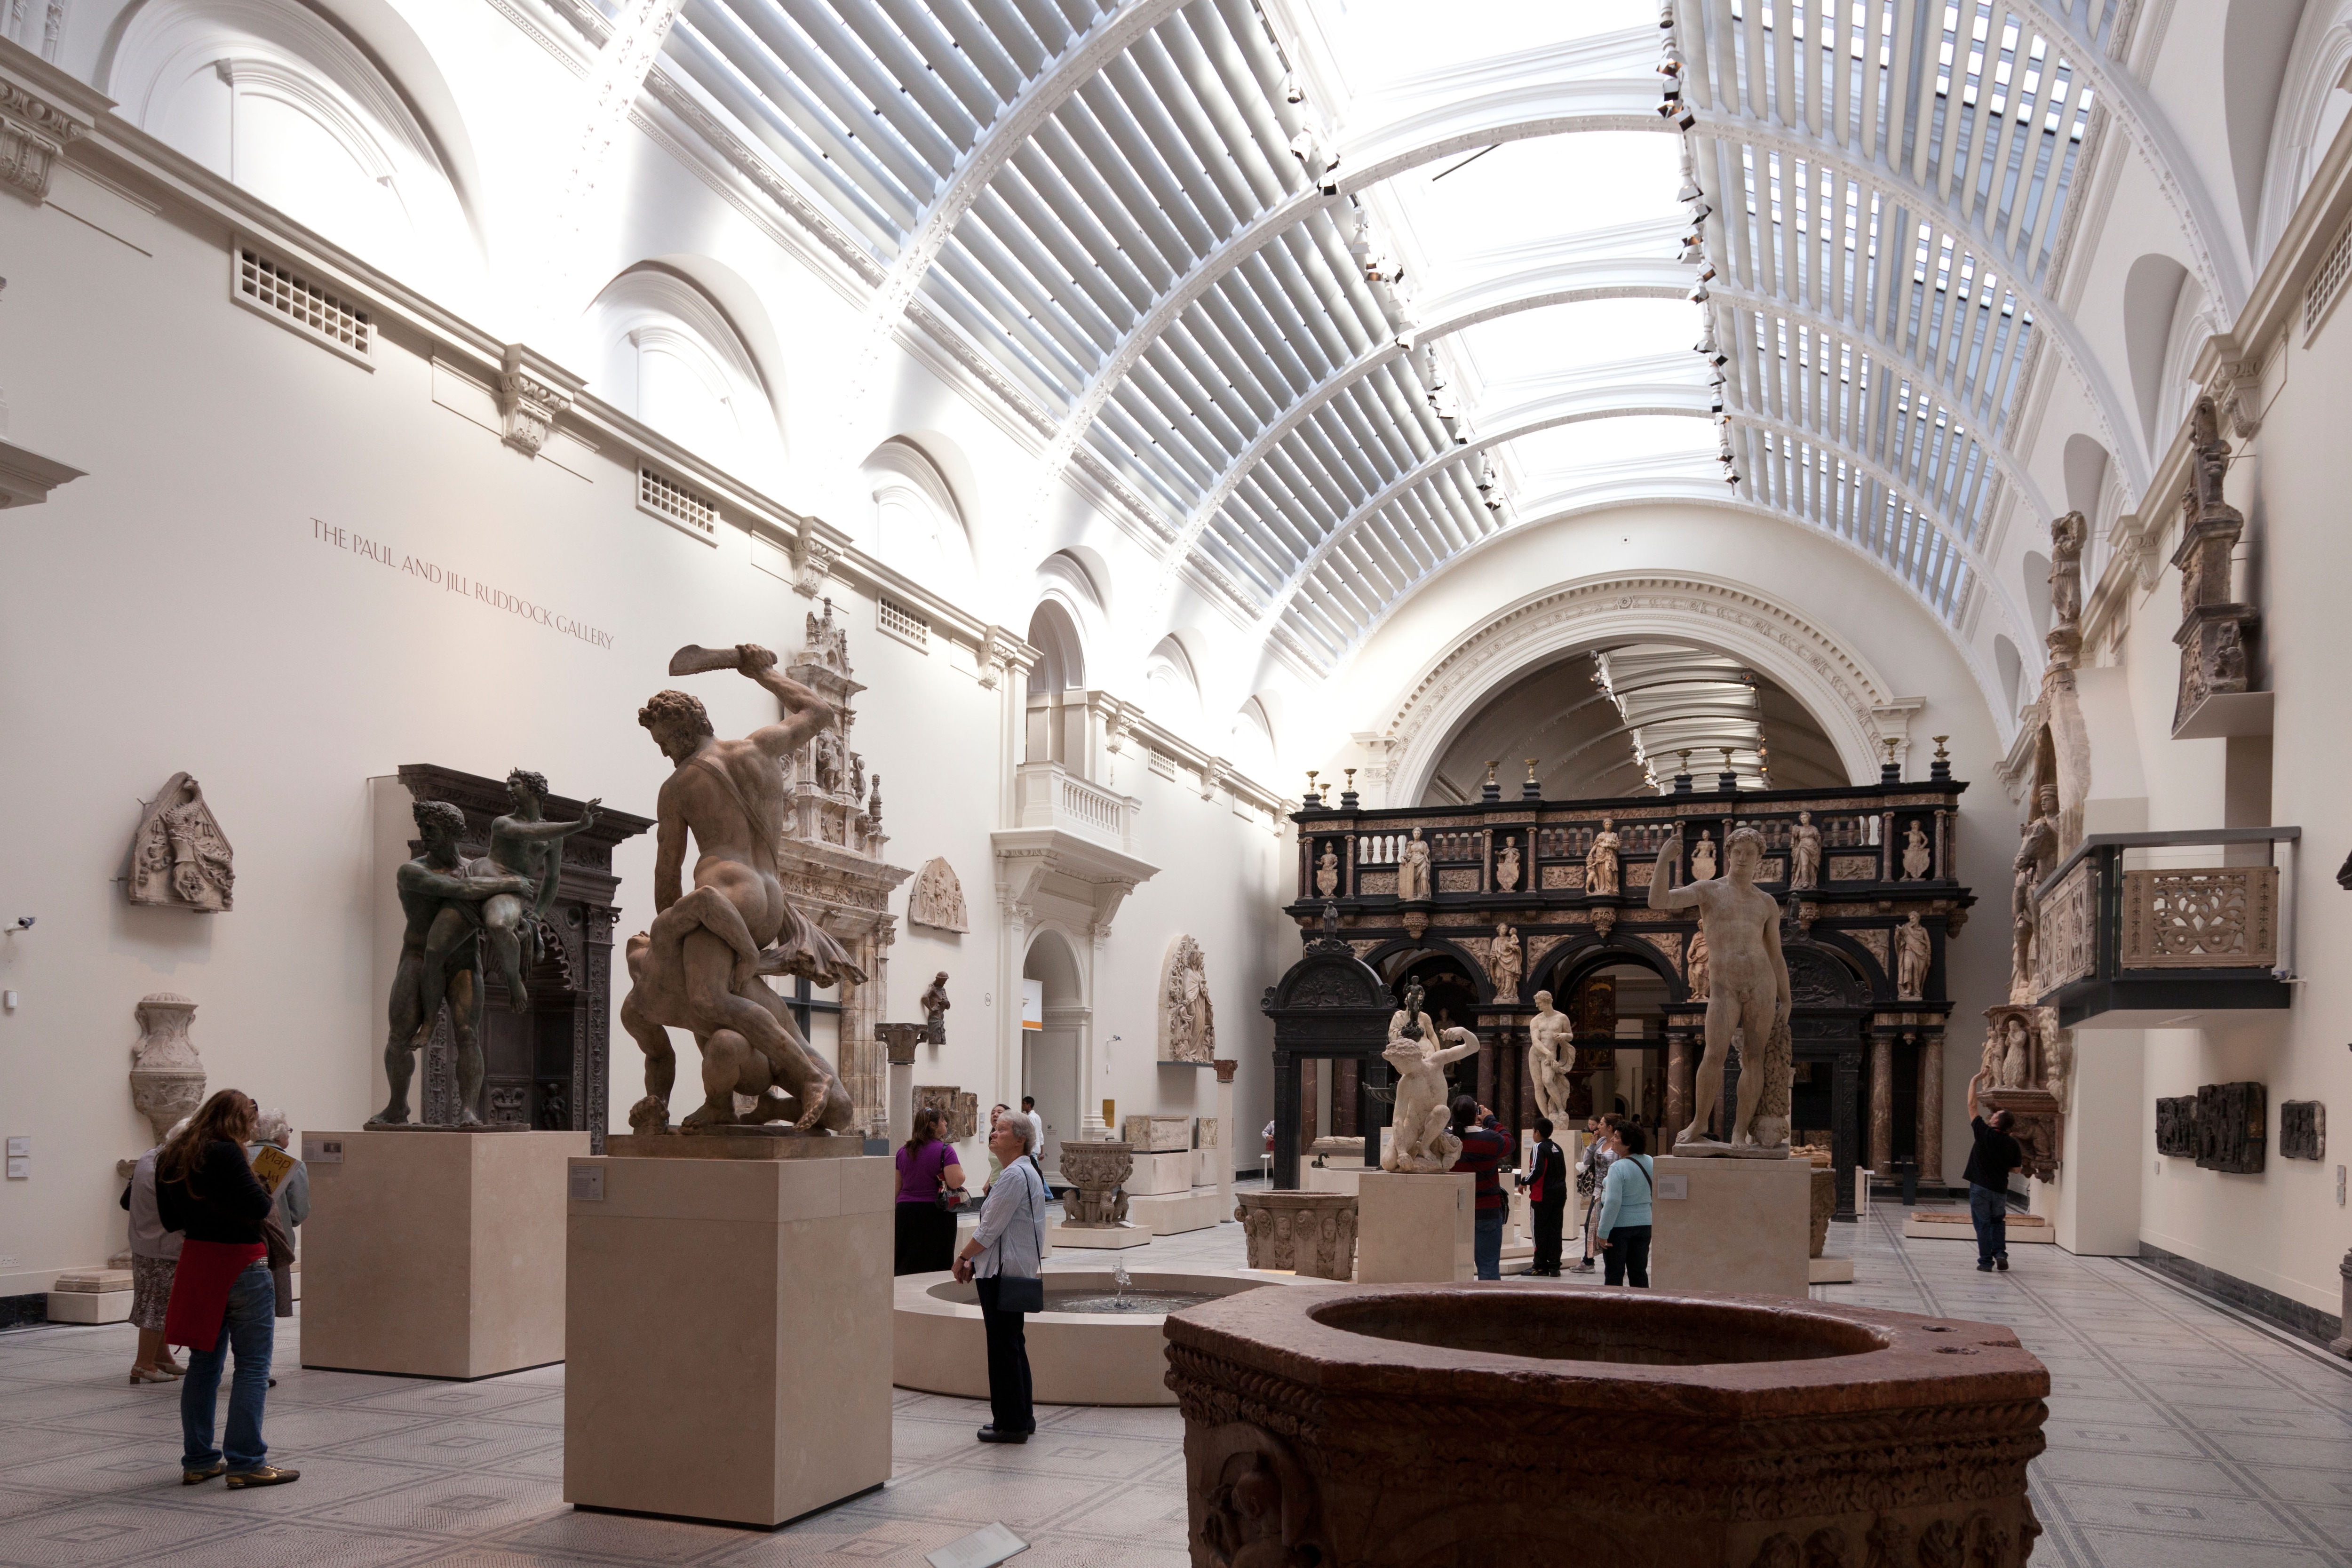 Victoria And Albert Museum - One of the Top Attractions in ...